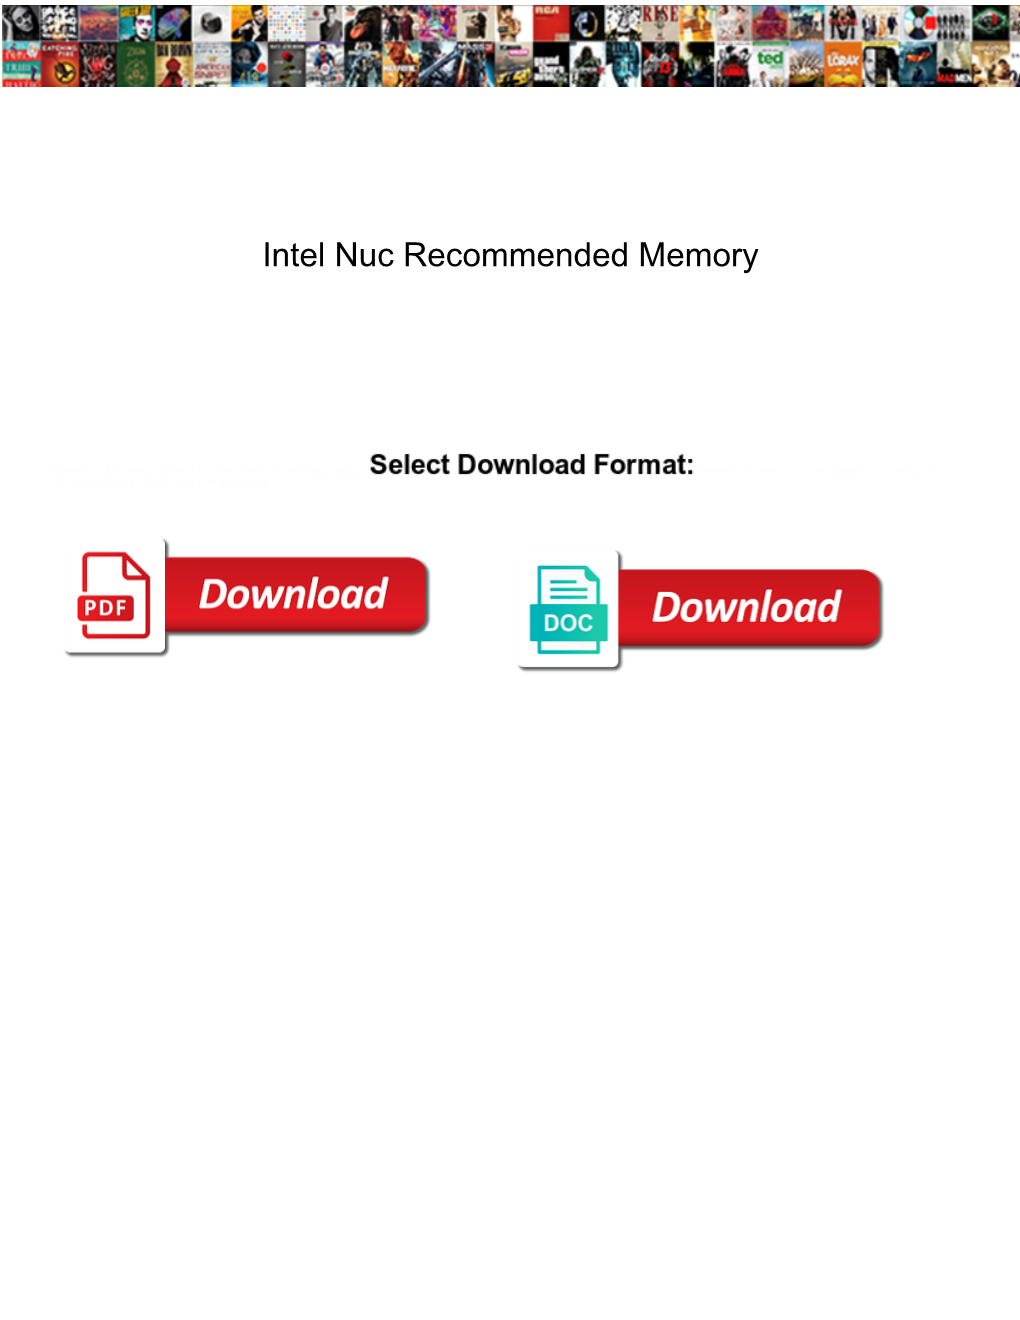 Intel Nuc Recommended Memory